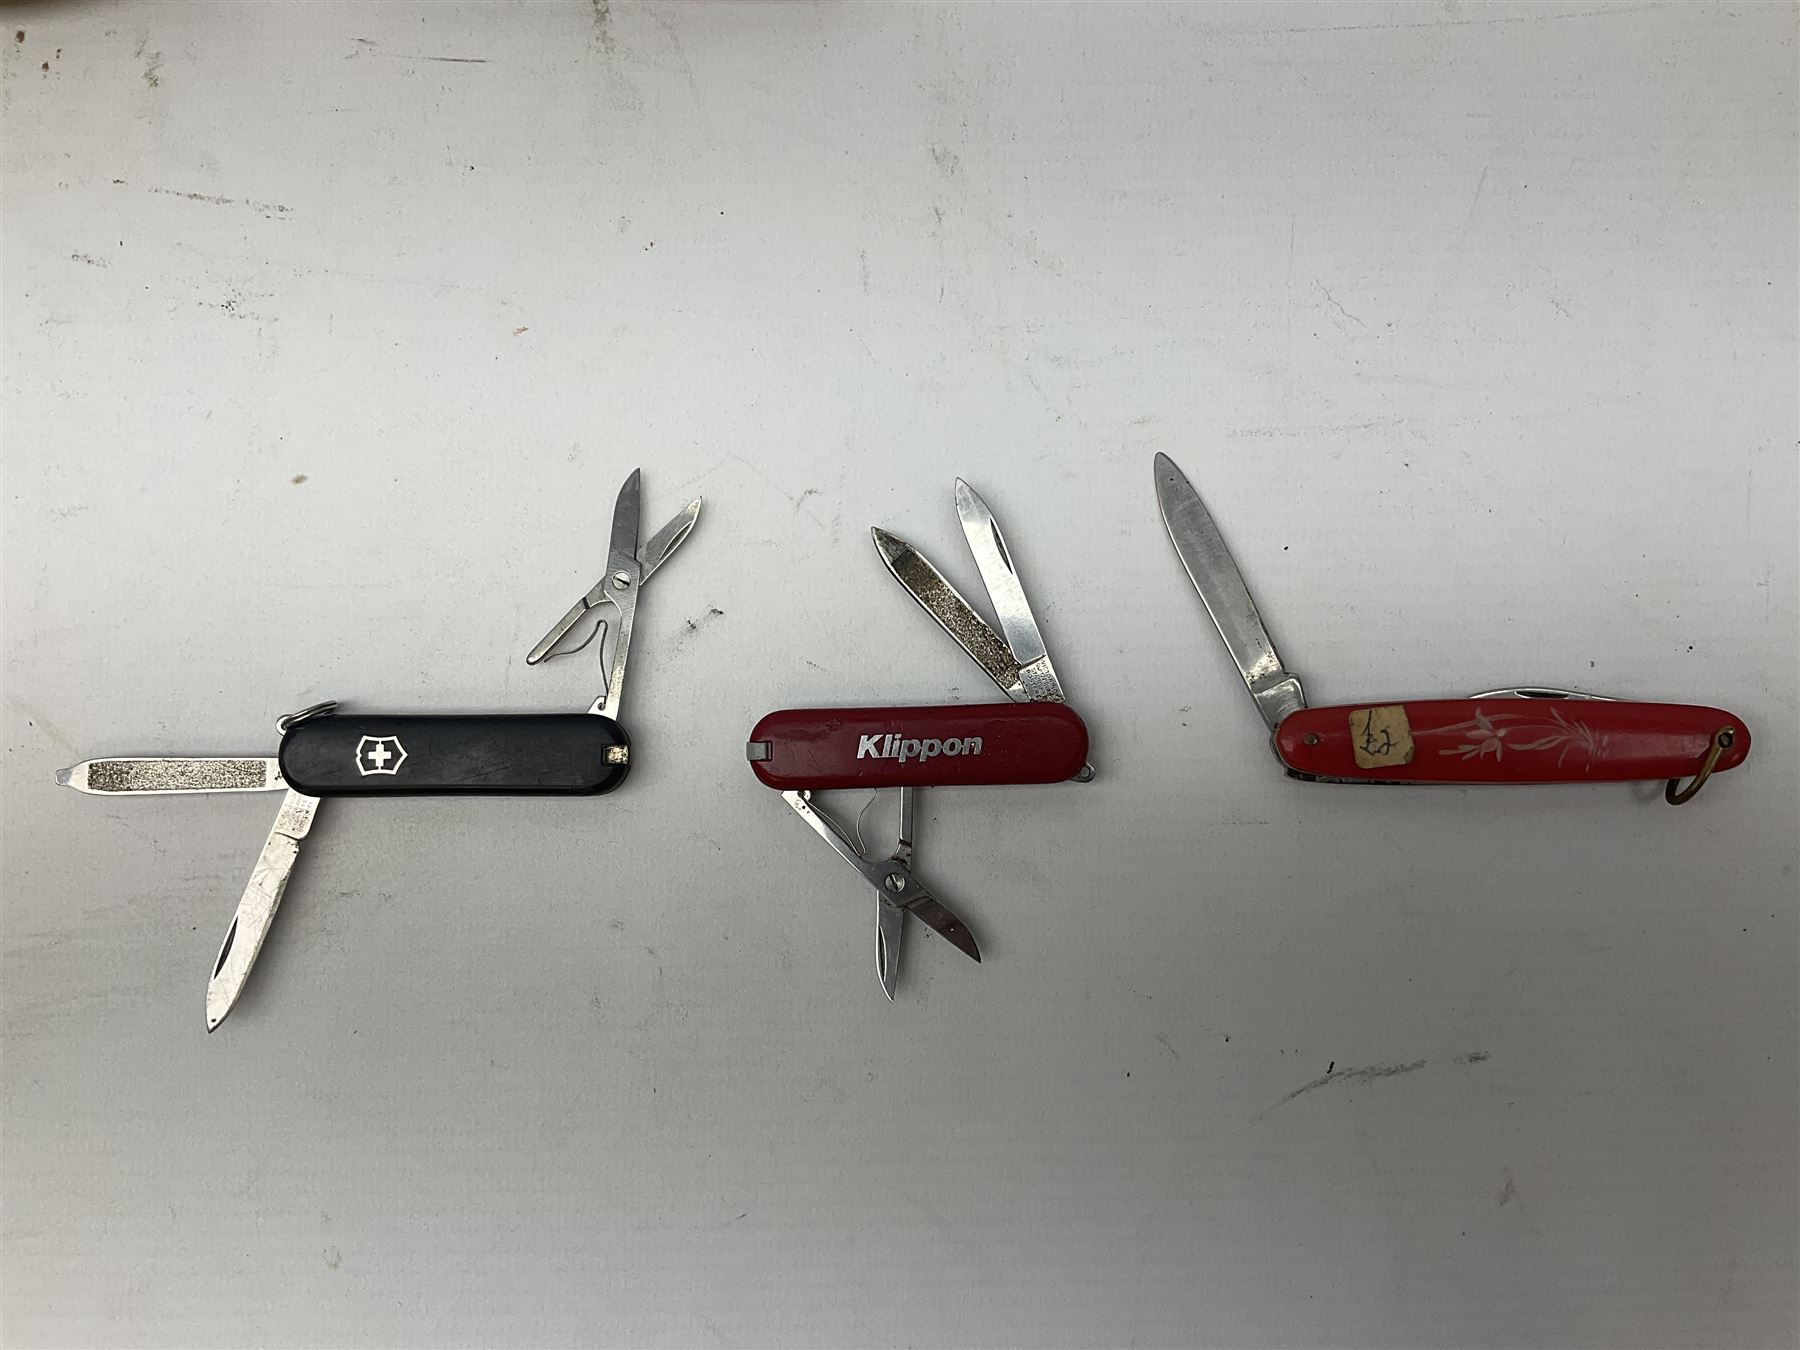 Thirteen pocket knives including Swiss Army knives and other similar examples - Image 2 of 6